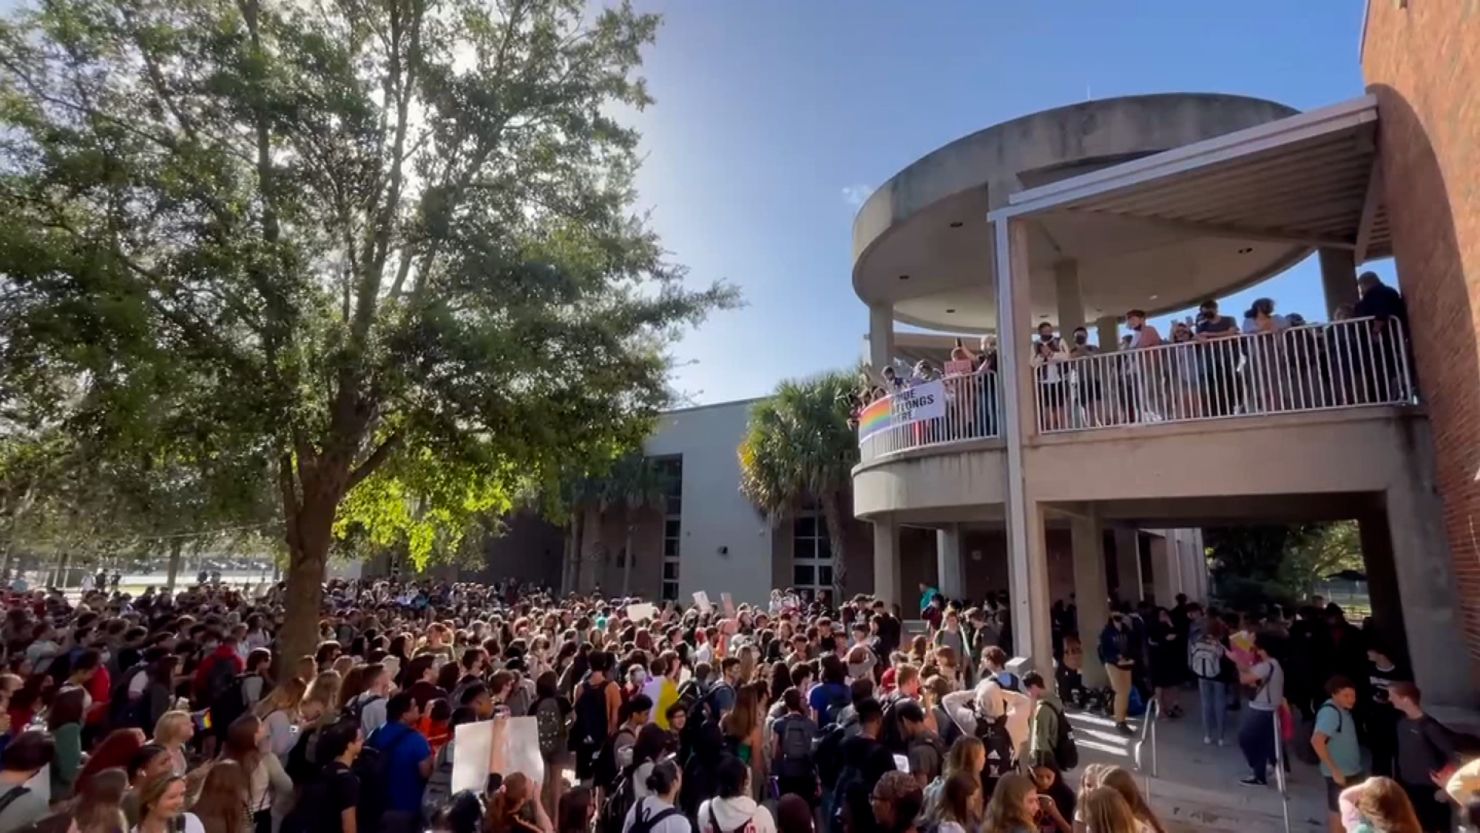 A massive student walkout in protest of Florida's "Don't Say Gay" bill took place at Winter Park High School in Orange County on Monday.